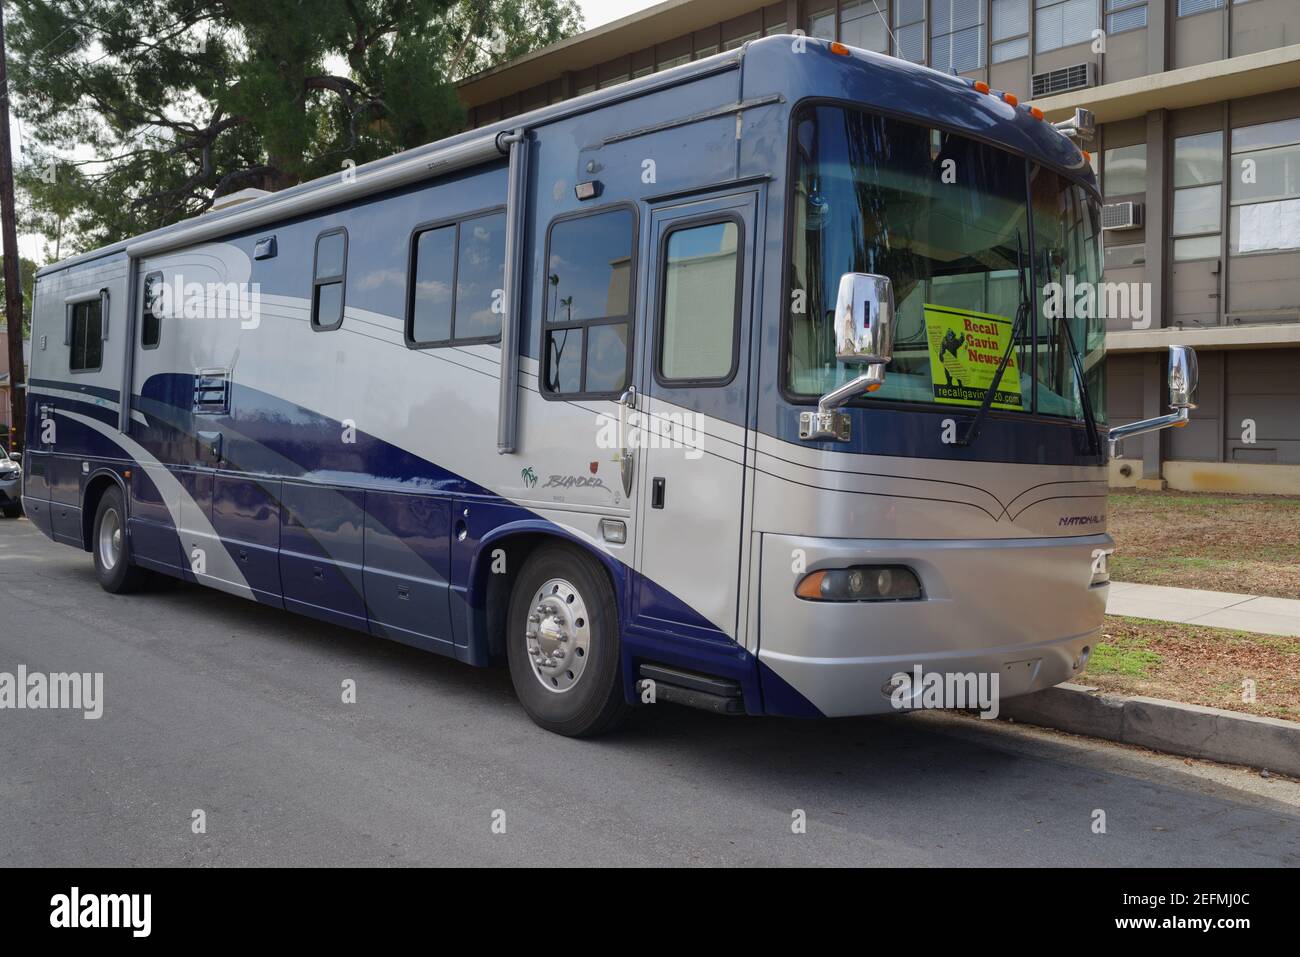 Pasadena, CA, USA - January 27, 2021: this image shows a political campaign recreational vehicle parked on a street in the City of Pasadena. Stock Photo